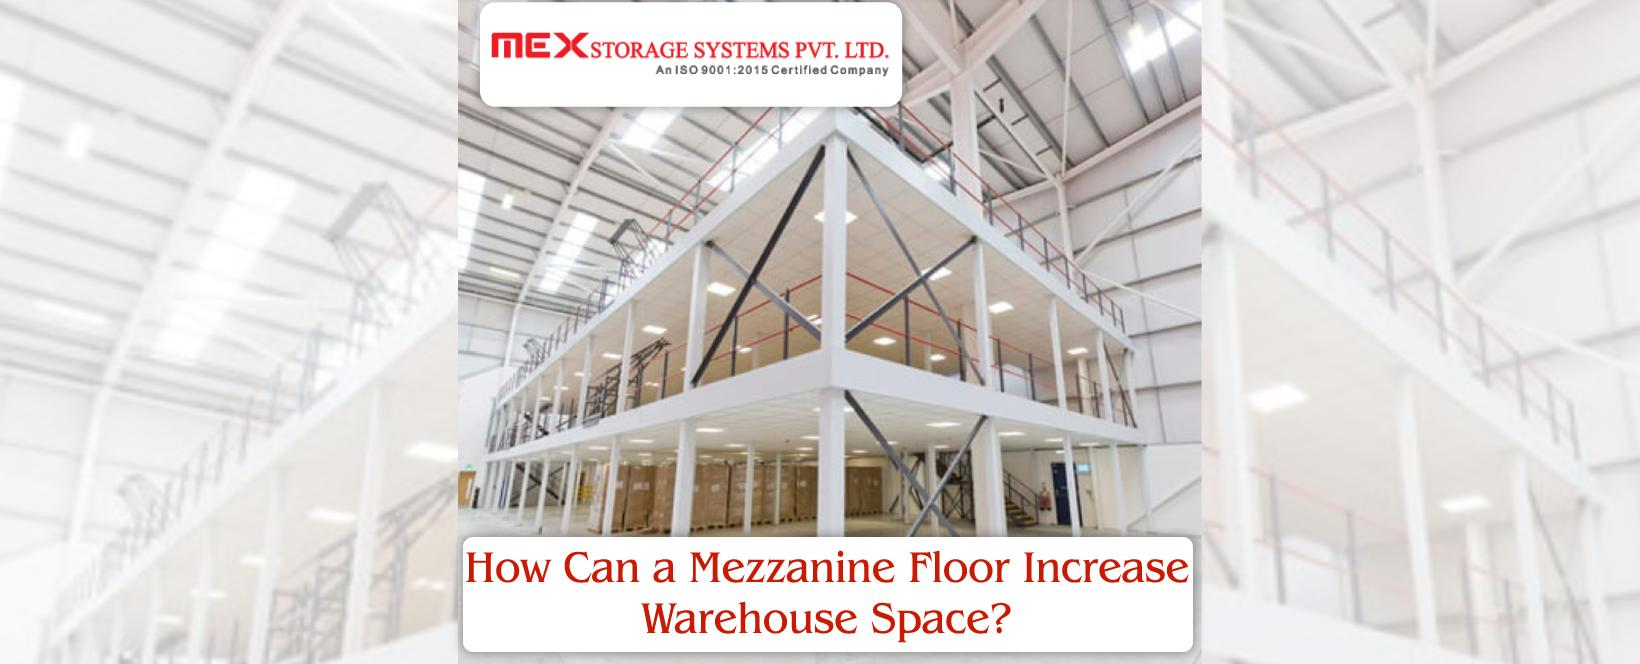 How Can a Mezzanine Floor Increase Warehouse Space?